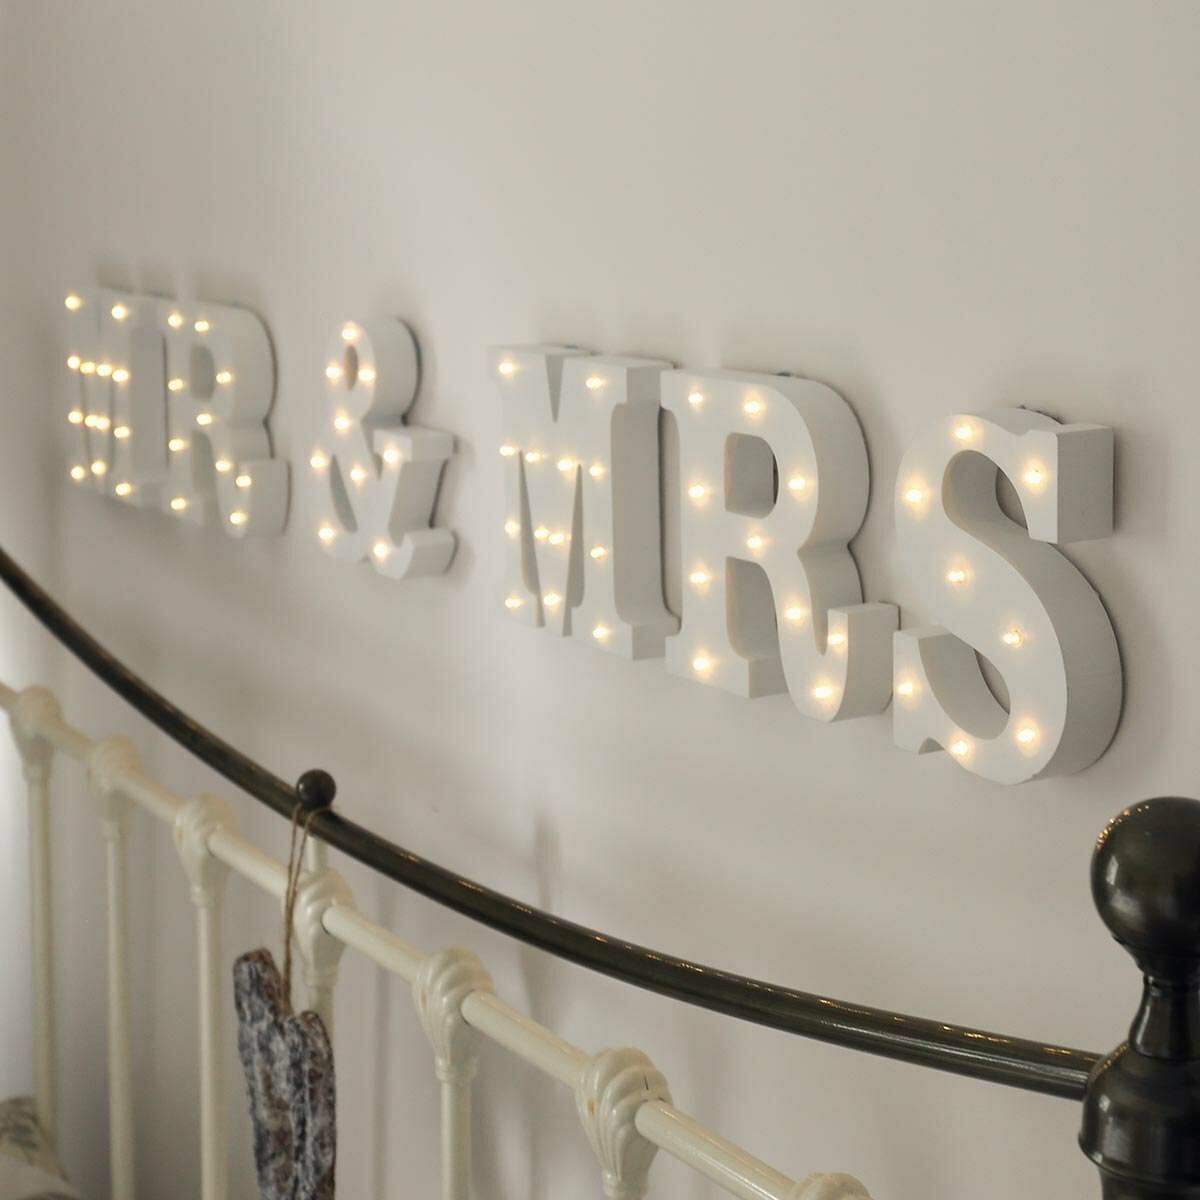 Mr & Mrs Battery Light Up Circus Letters, Warm White LEDs image 5